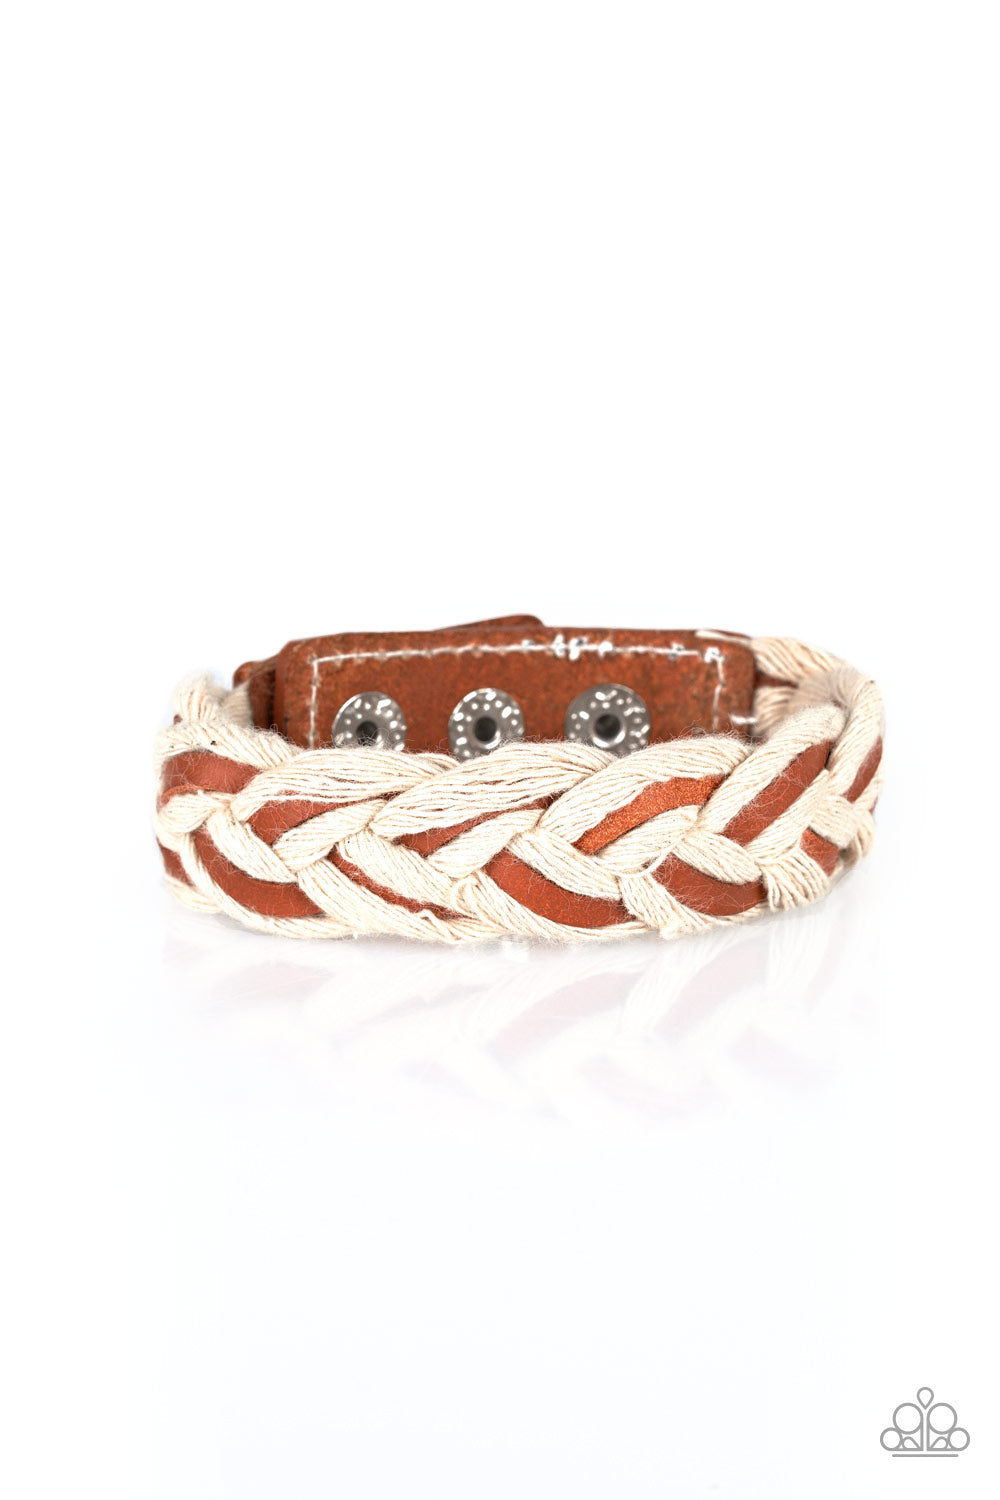 Outback Outlaw - Brown Urban Snap Bracelet - Paparazzi Accessories -
Brown leather laces weave with white rope-like thread across the wrist, creating a rustic braid. Features an adjustable snap closure.
Sold as one individual bracelet.